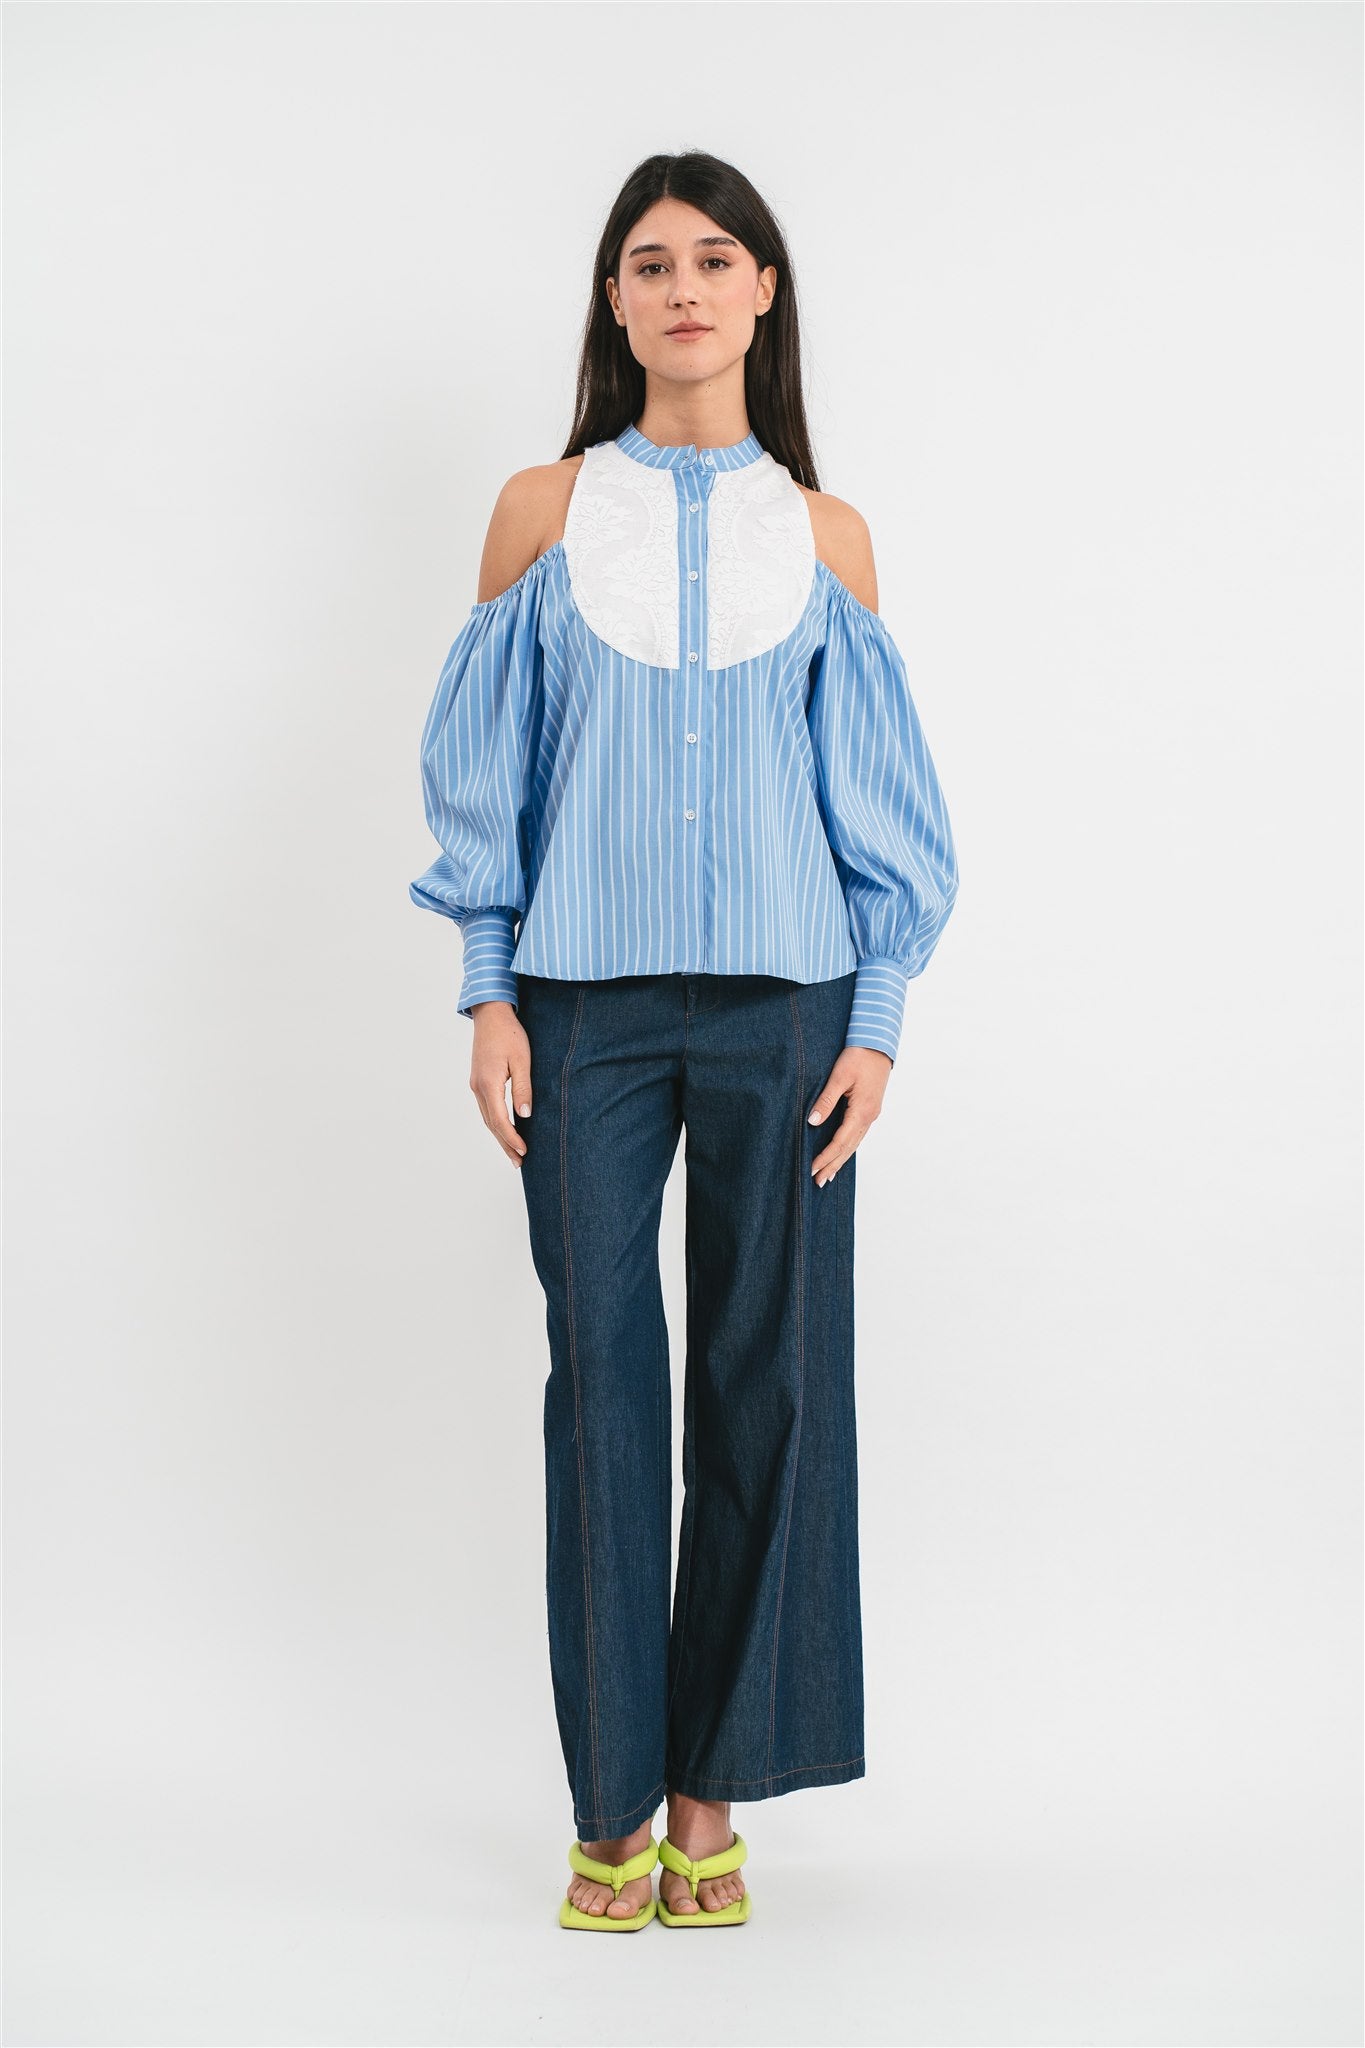 Striped shirt with lace plastron